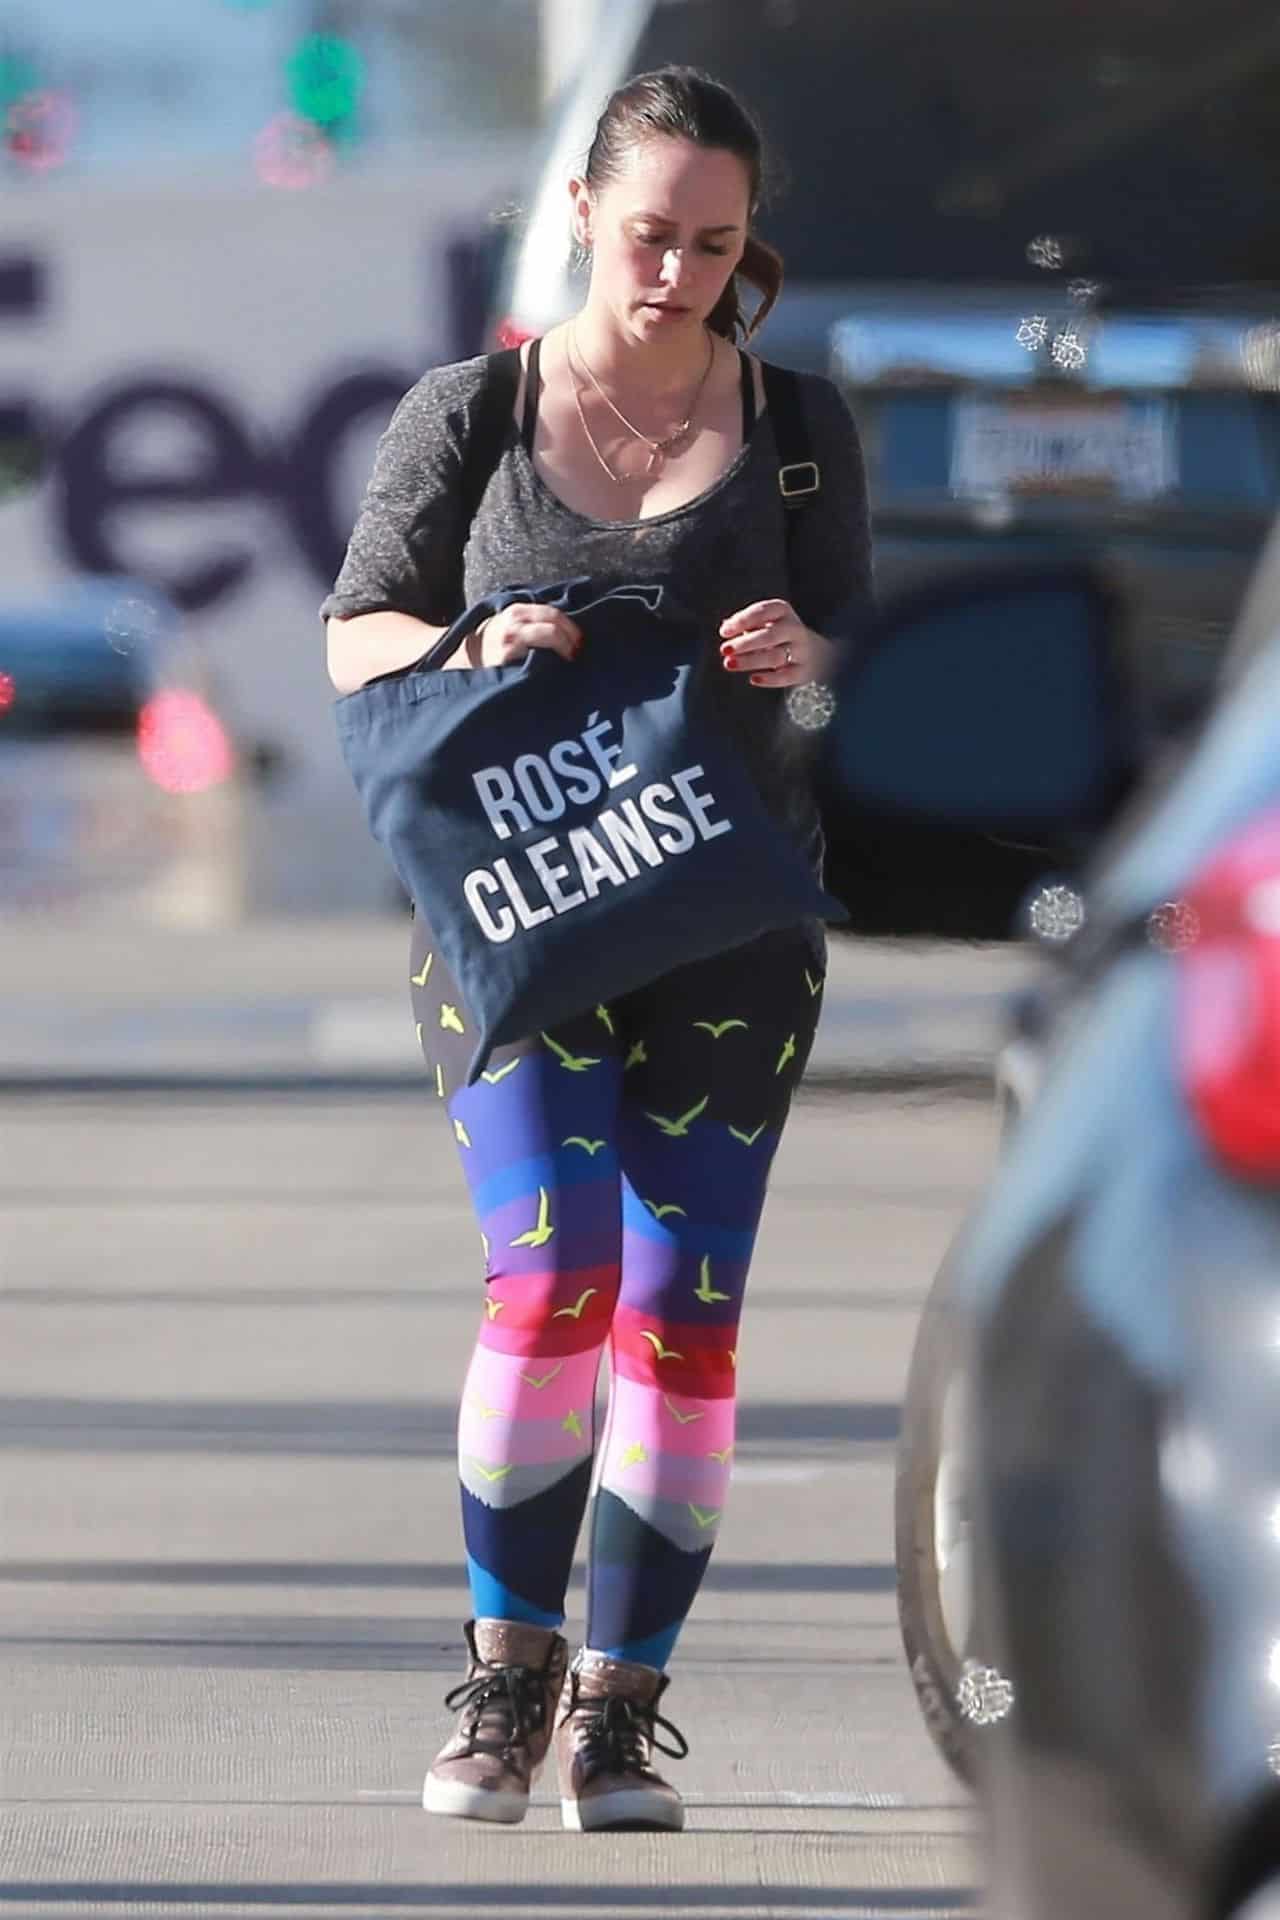 Jennifer Love Hewitt Flaunts Gym-Ready Look in Vibrant Leggings and Gray Top